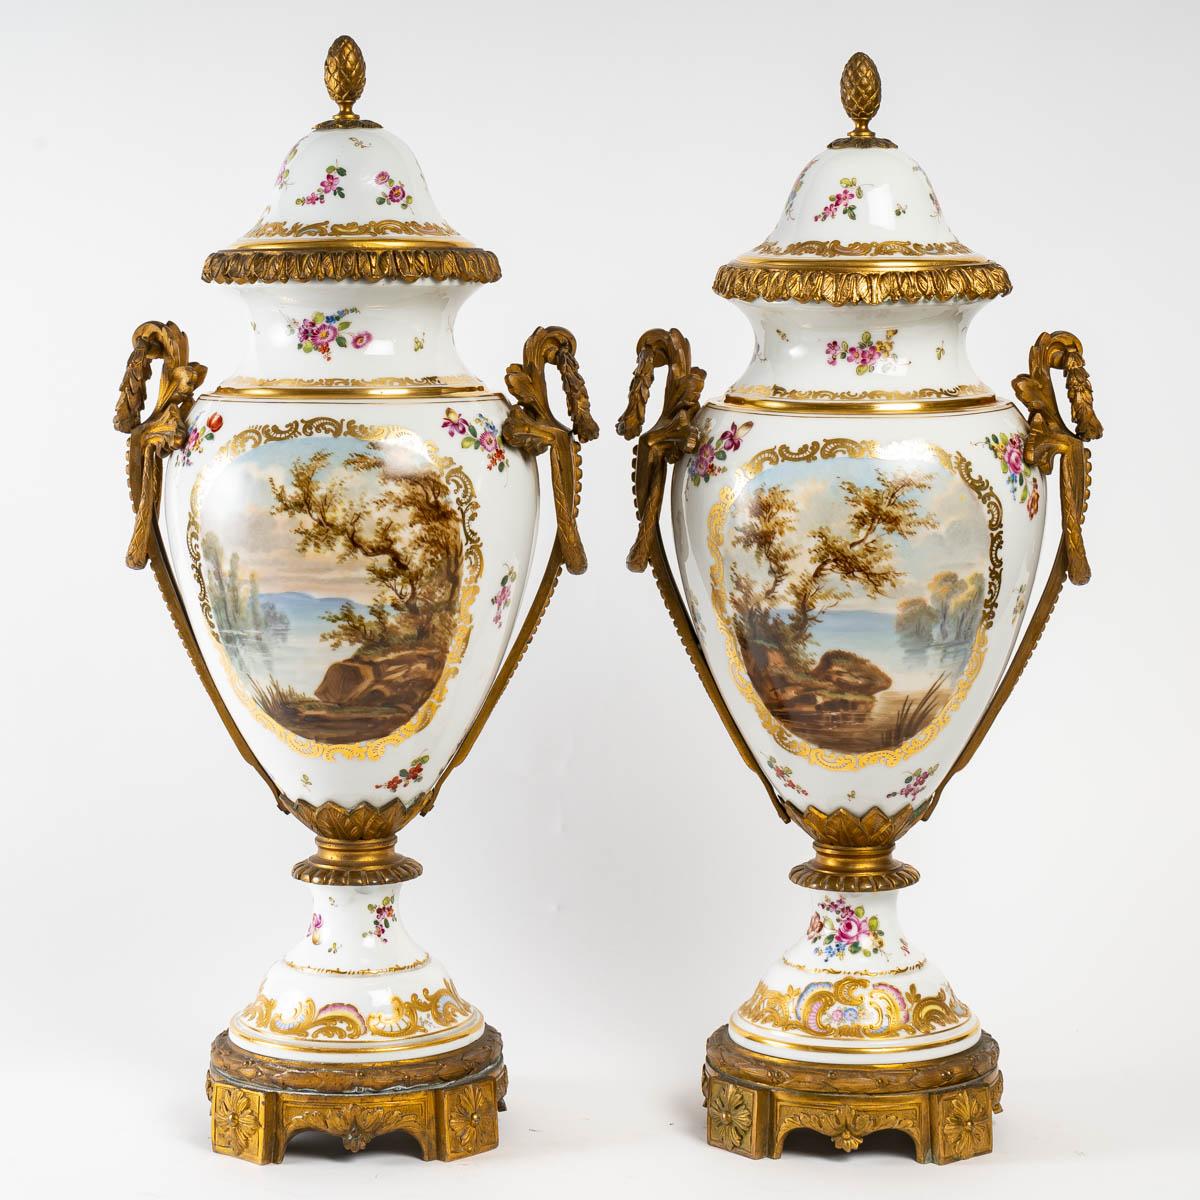 Bronze Pair of Sèvres porcelain covered vases, 19th century